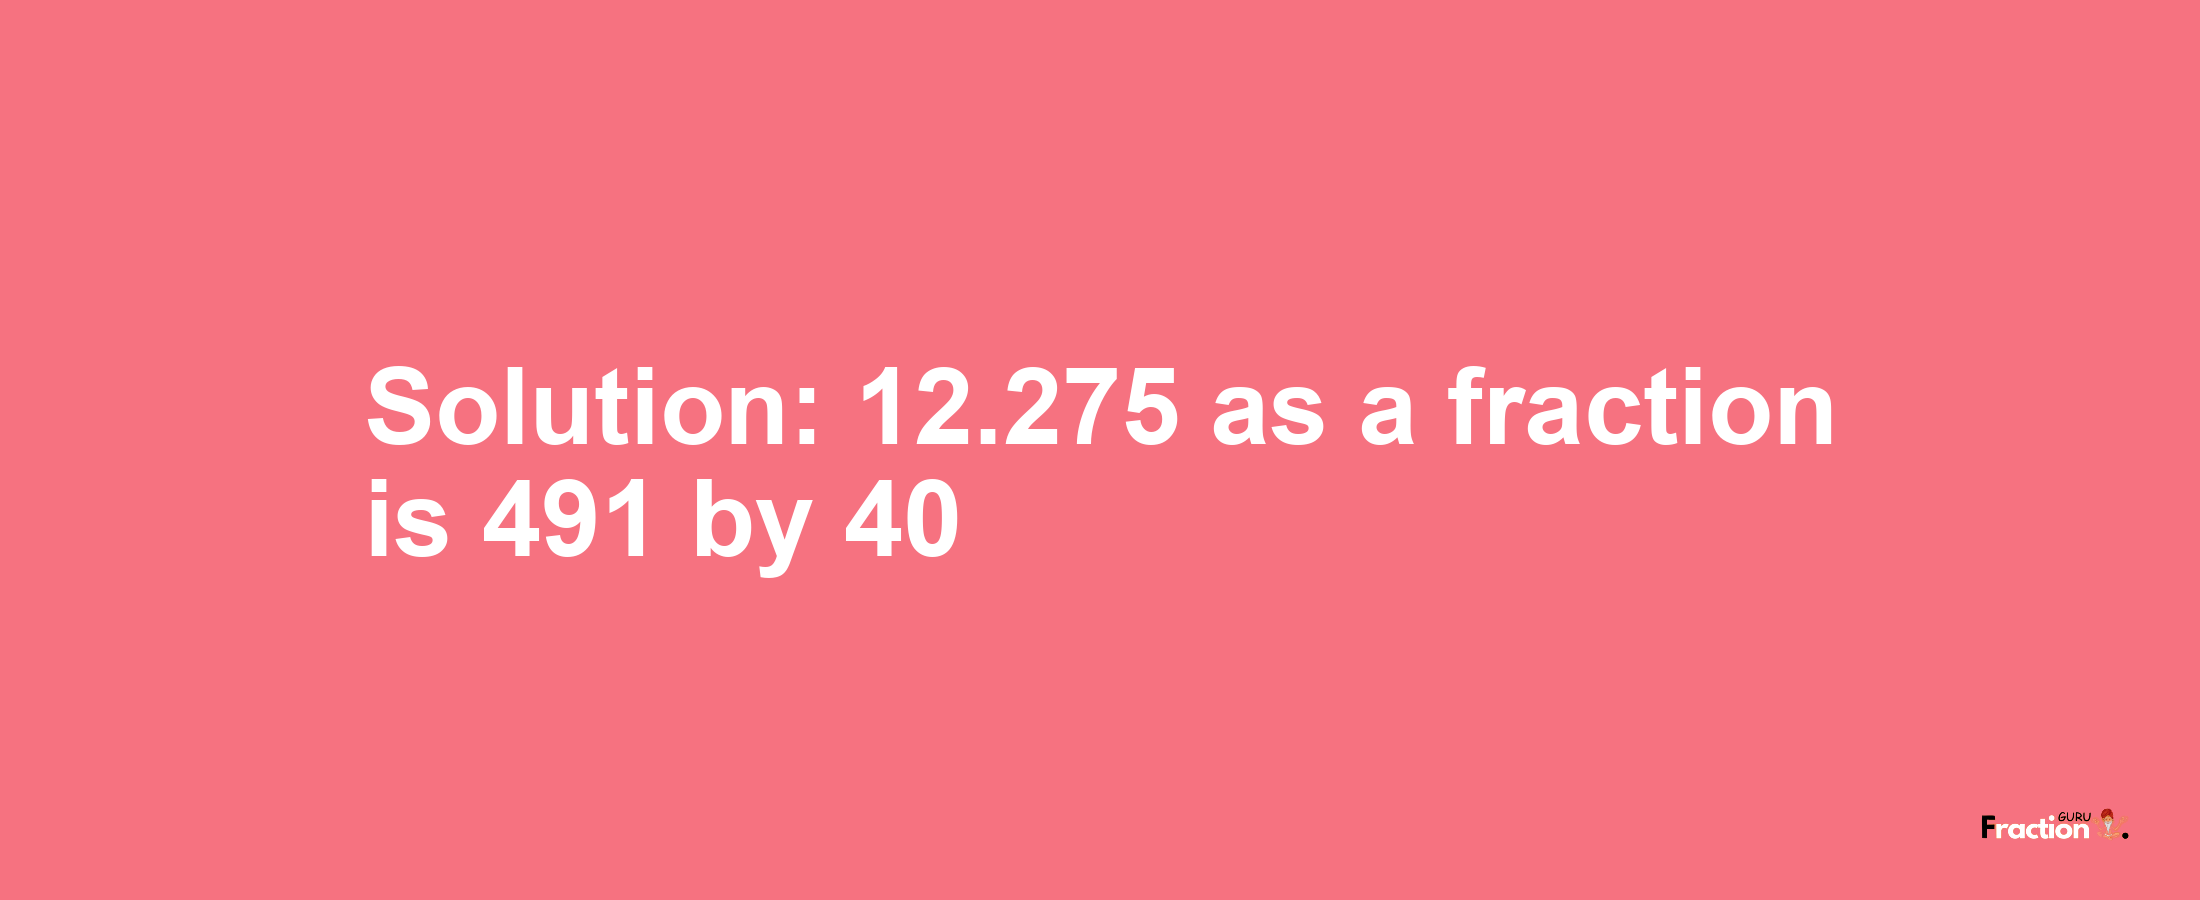 Solution:12.275 as a fraction is 491/40